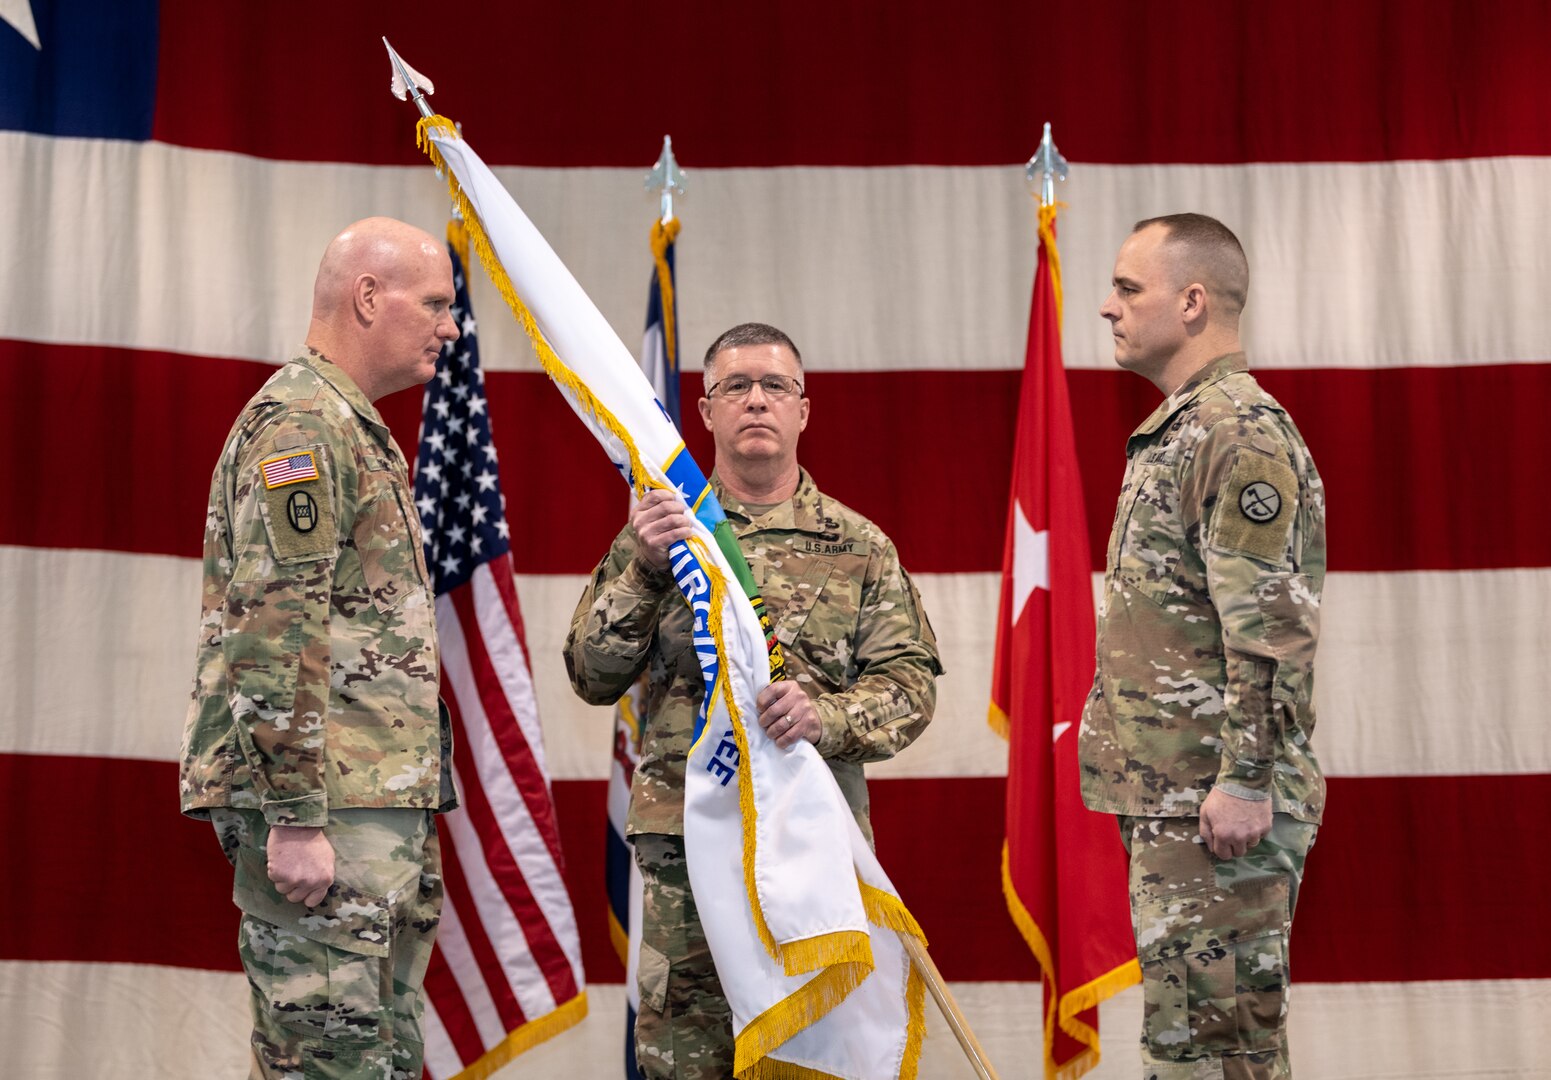 Command Sgts. Maj. James "Dusty" Jones, Phillip Cantrell, and James Allen took part in change of responsibility ceremonies held Feb. 2, 2019 at the WVNG Joint Forces Headquarters in Charleston.